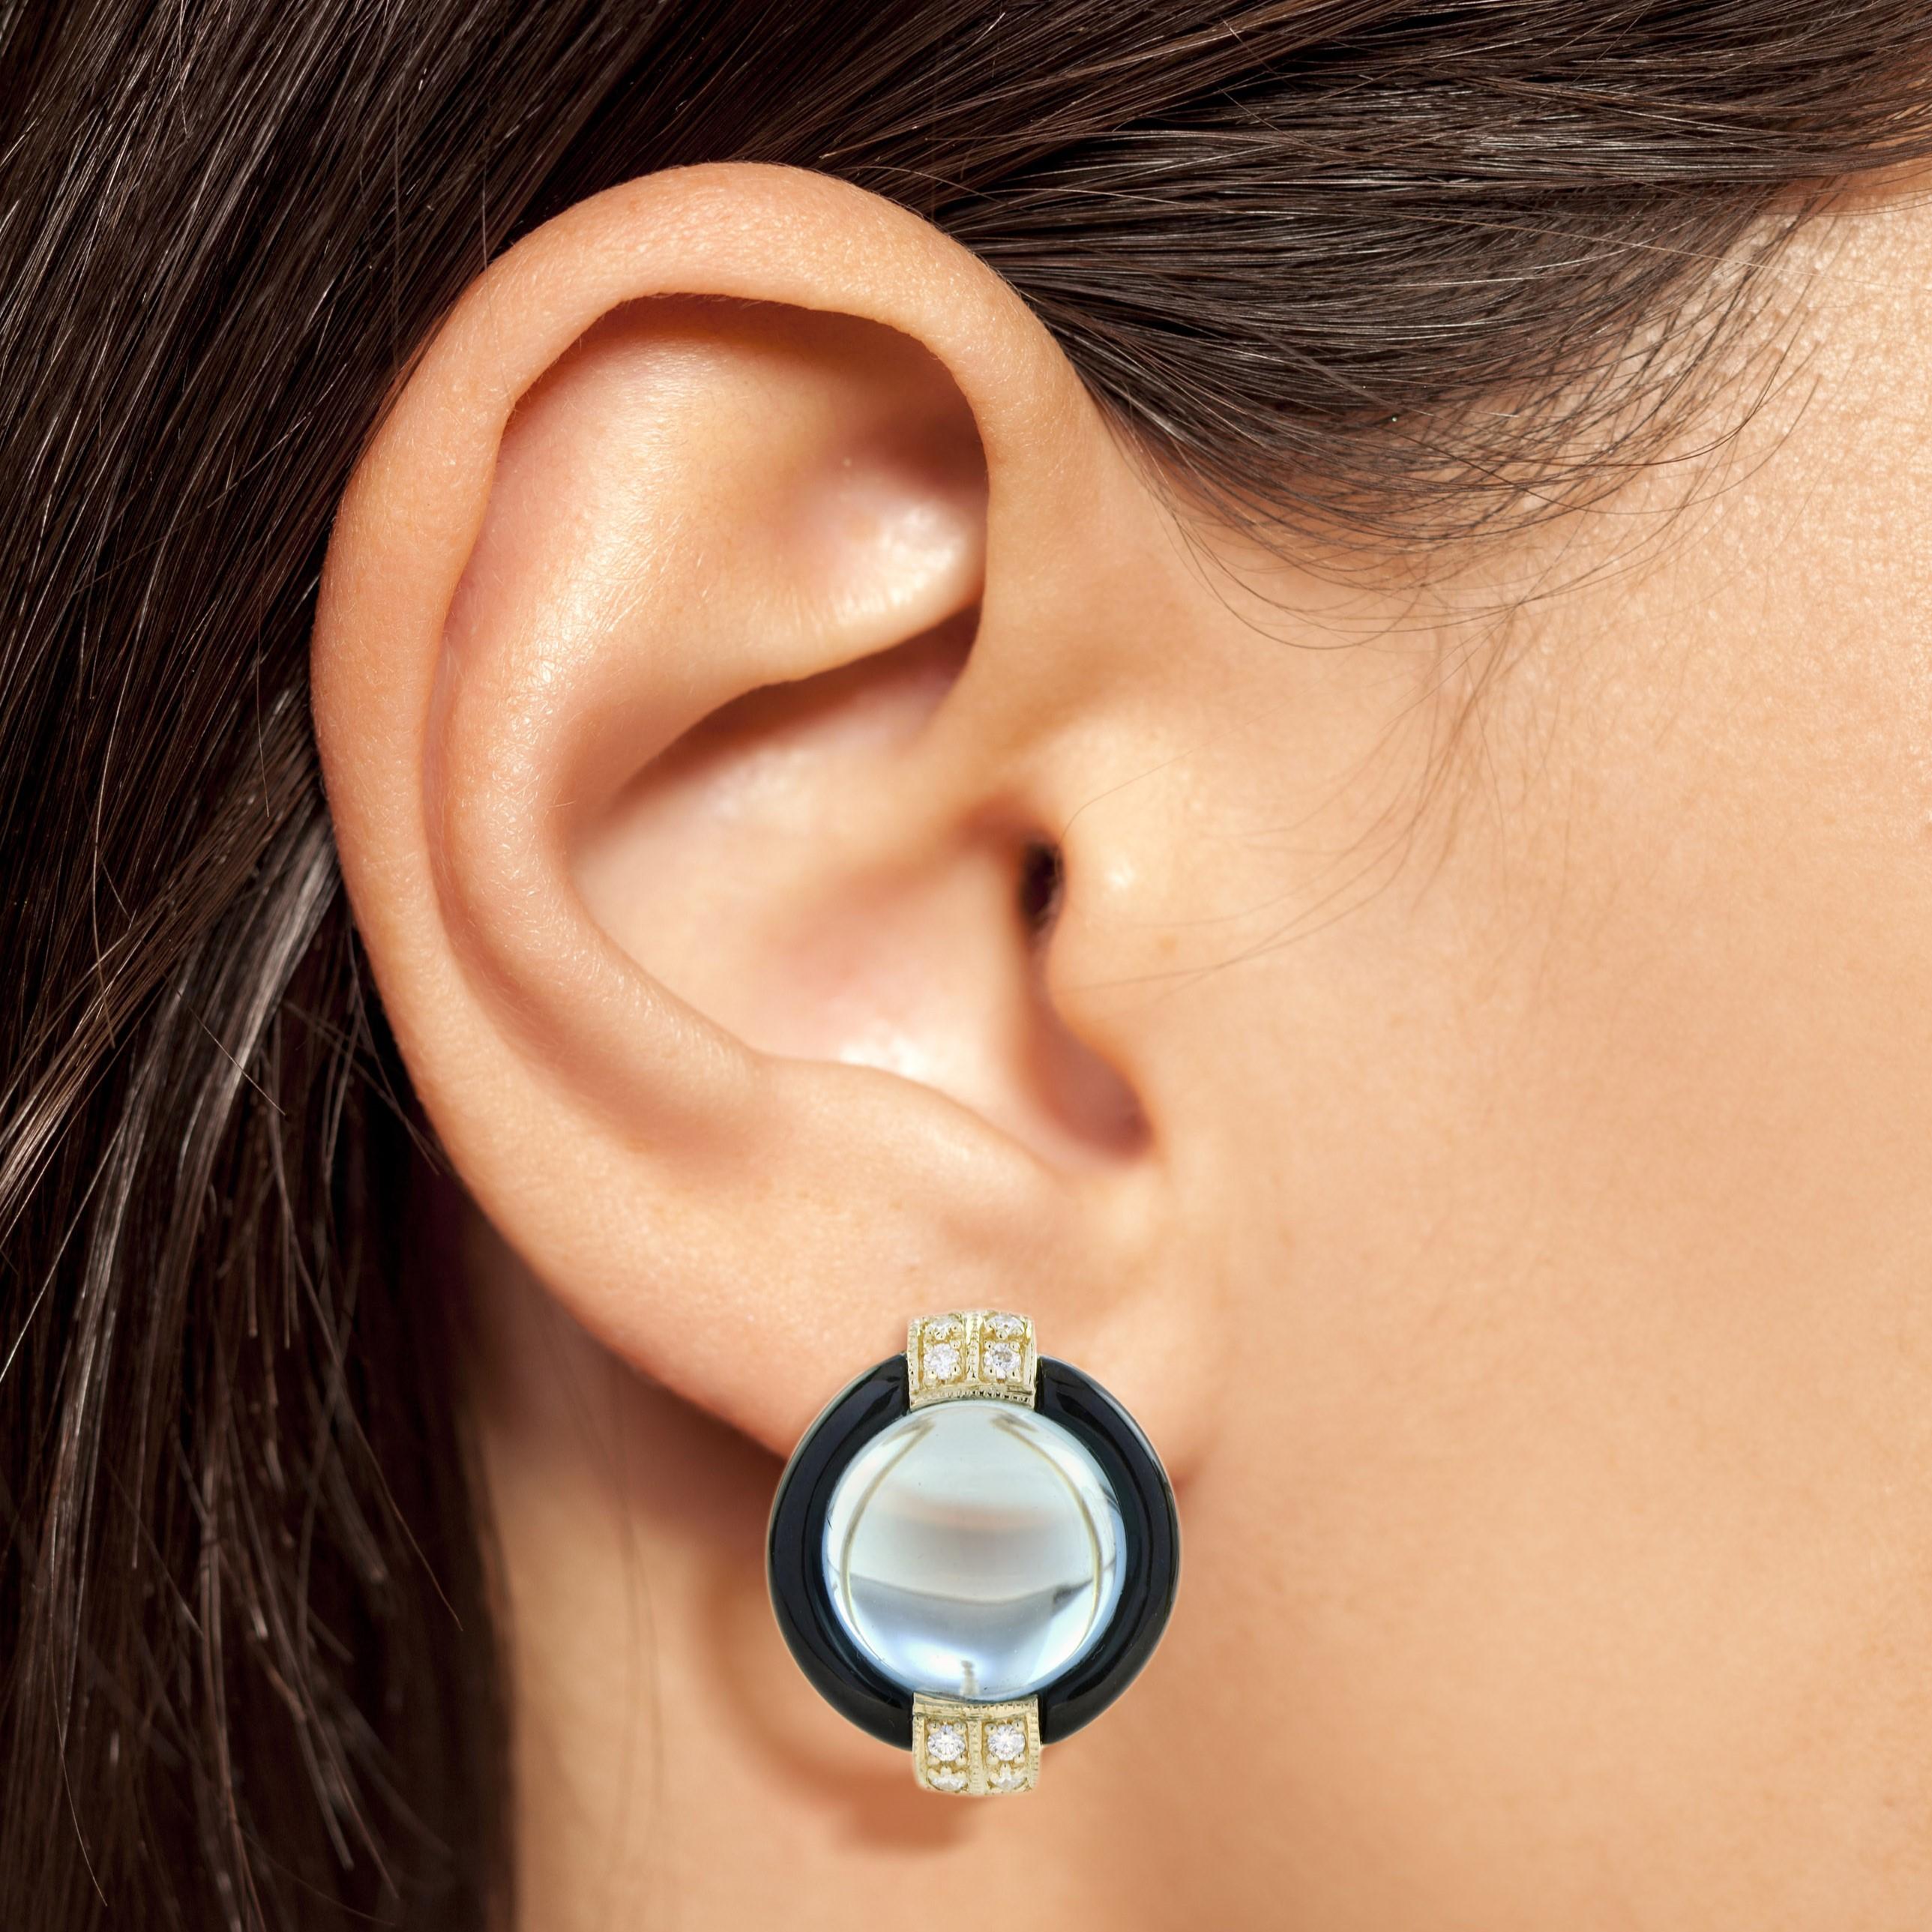 With radiant sparkle and bold contrast, these 14k yellow gold stud earrings are irresistible. Each features a cabochon blue topaz, edged in outer frame of black onyx.  

Information
Style: Art Deco
Metal: 14K Yellow Gold
Width: 19 mm.
Length: 16